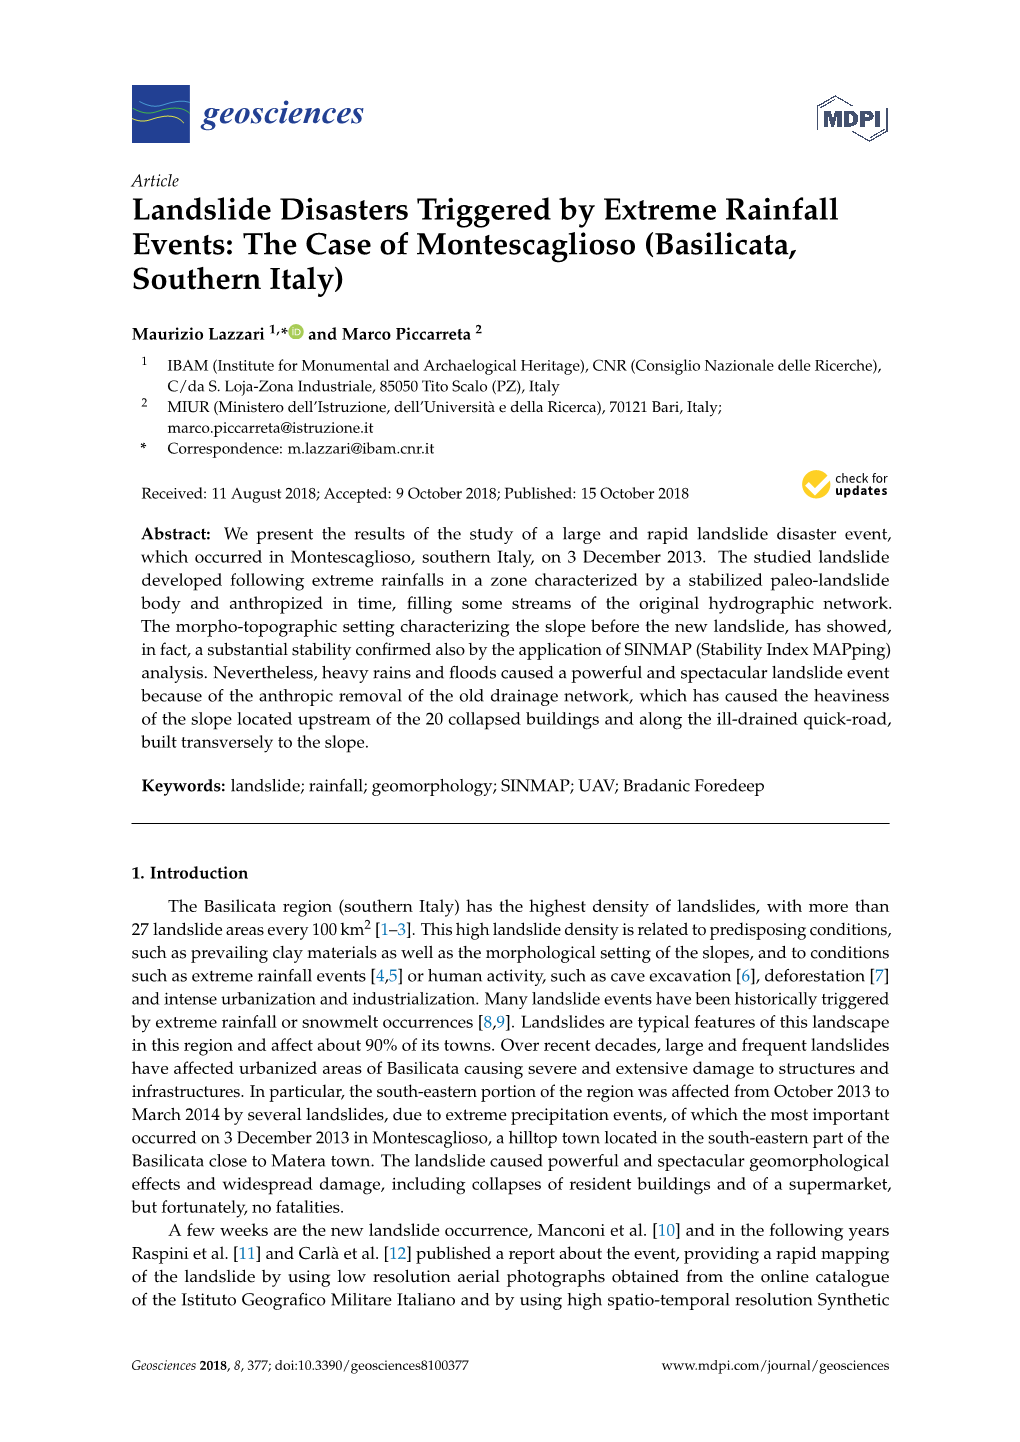 Landslide Disasters Triggered by Extreme Rainfall Events: the Case of Montescaglioso (Basilicata, Southern Italy)